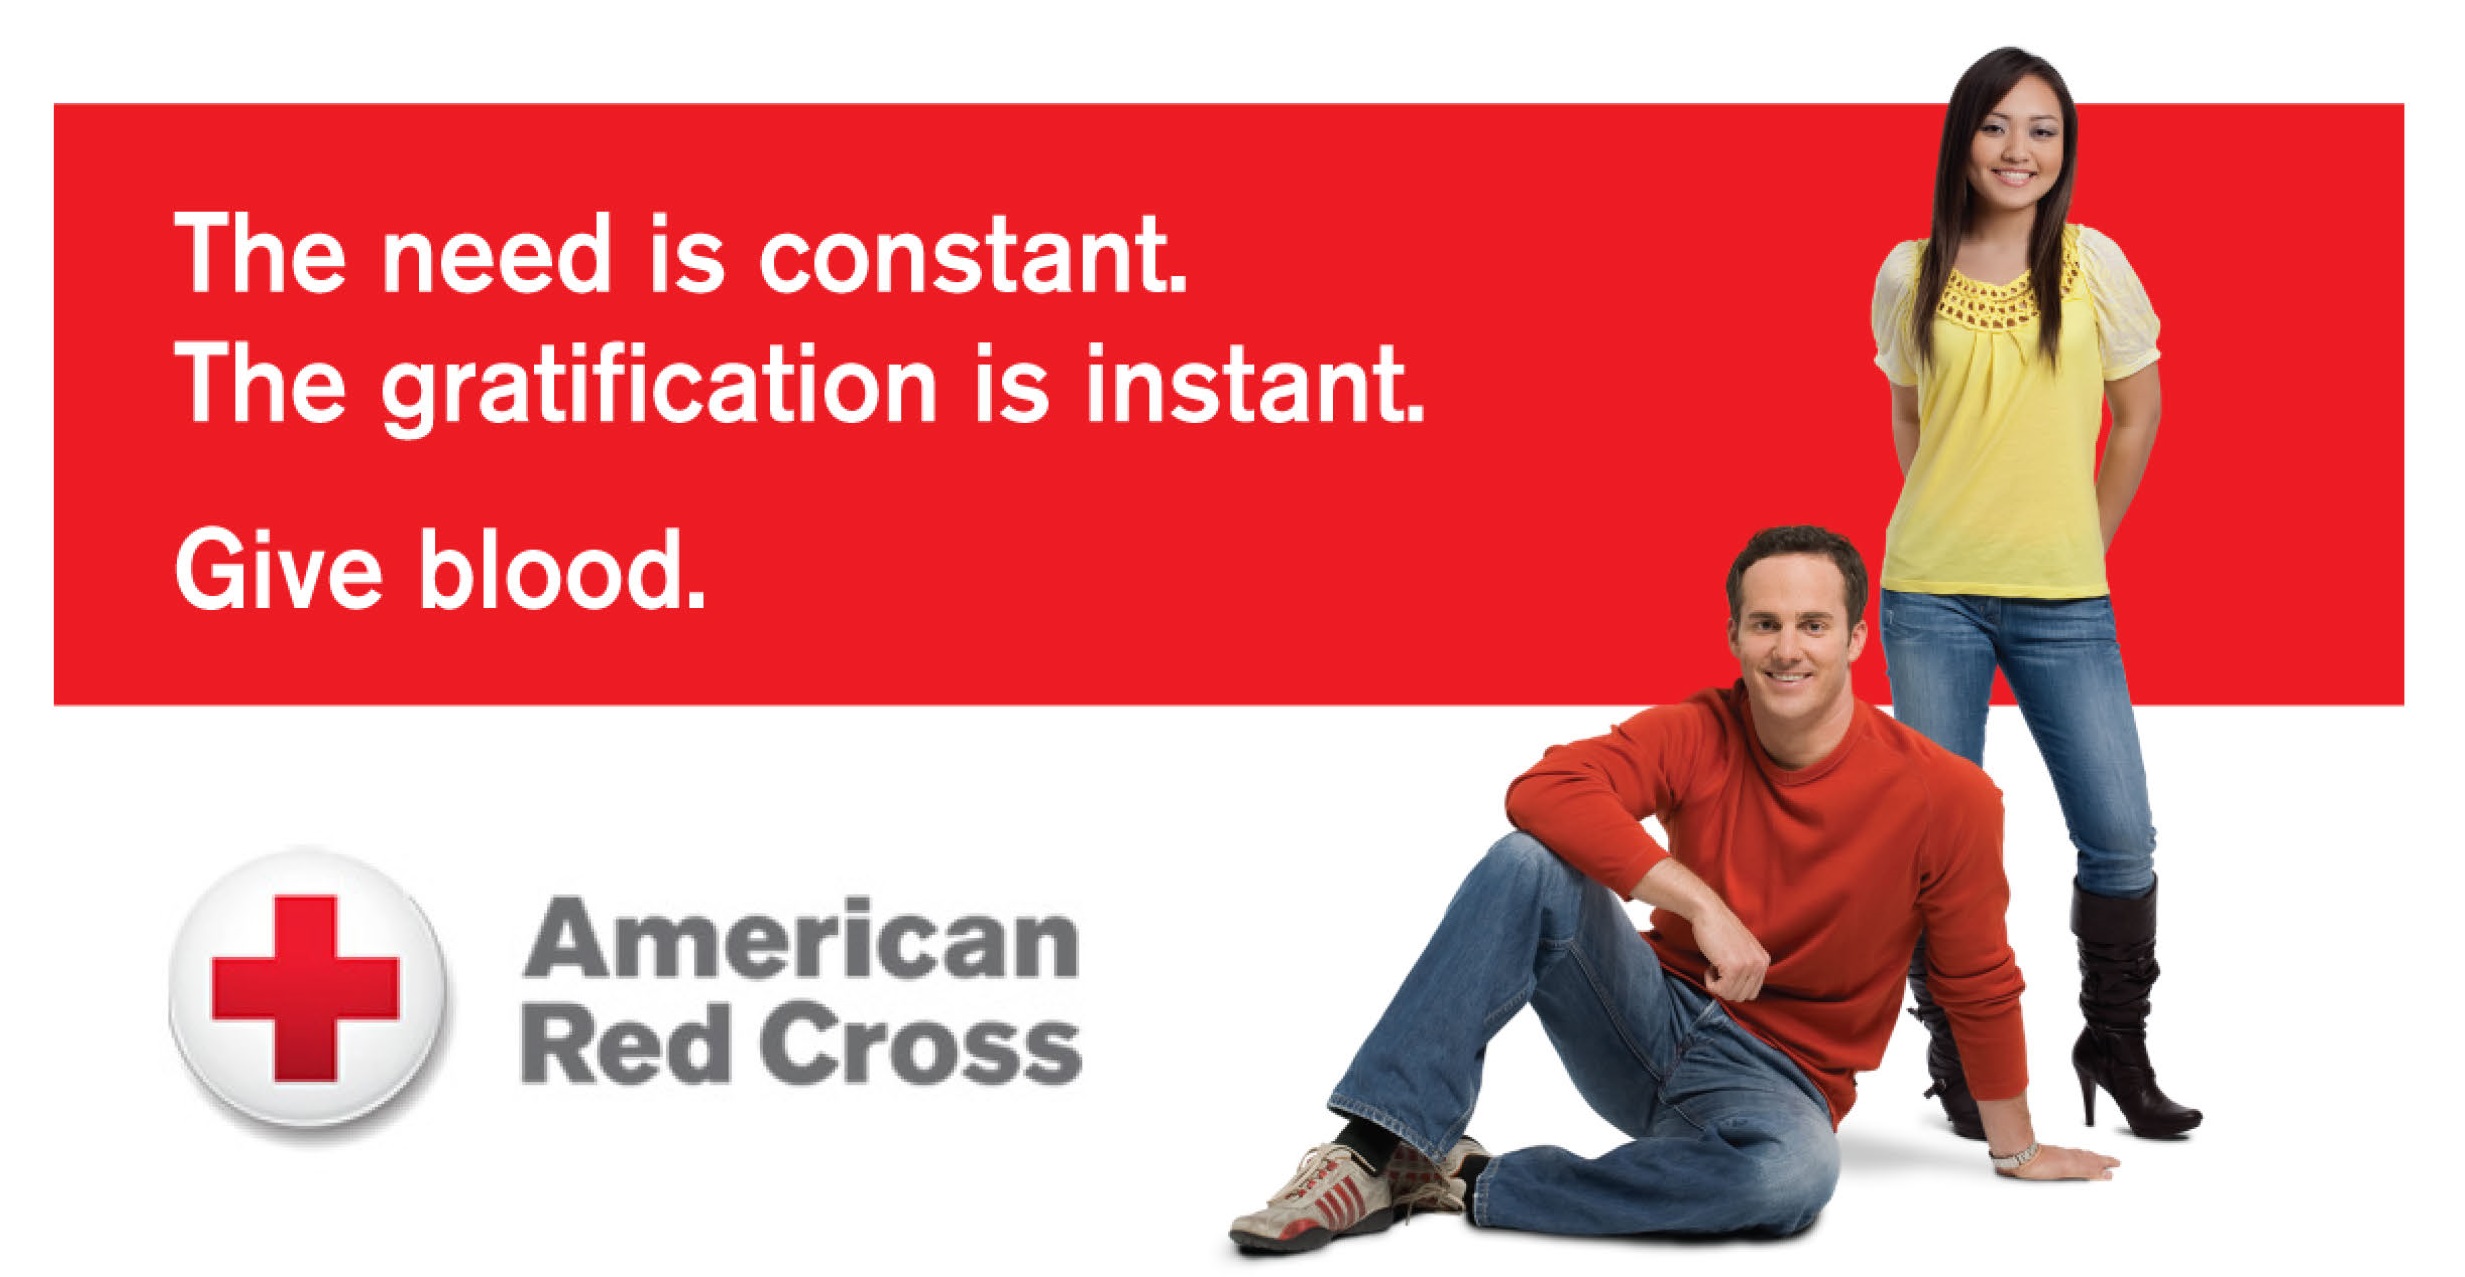 The need is constant. The gratification is instant. Give blood.